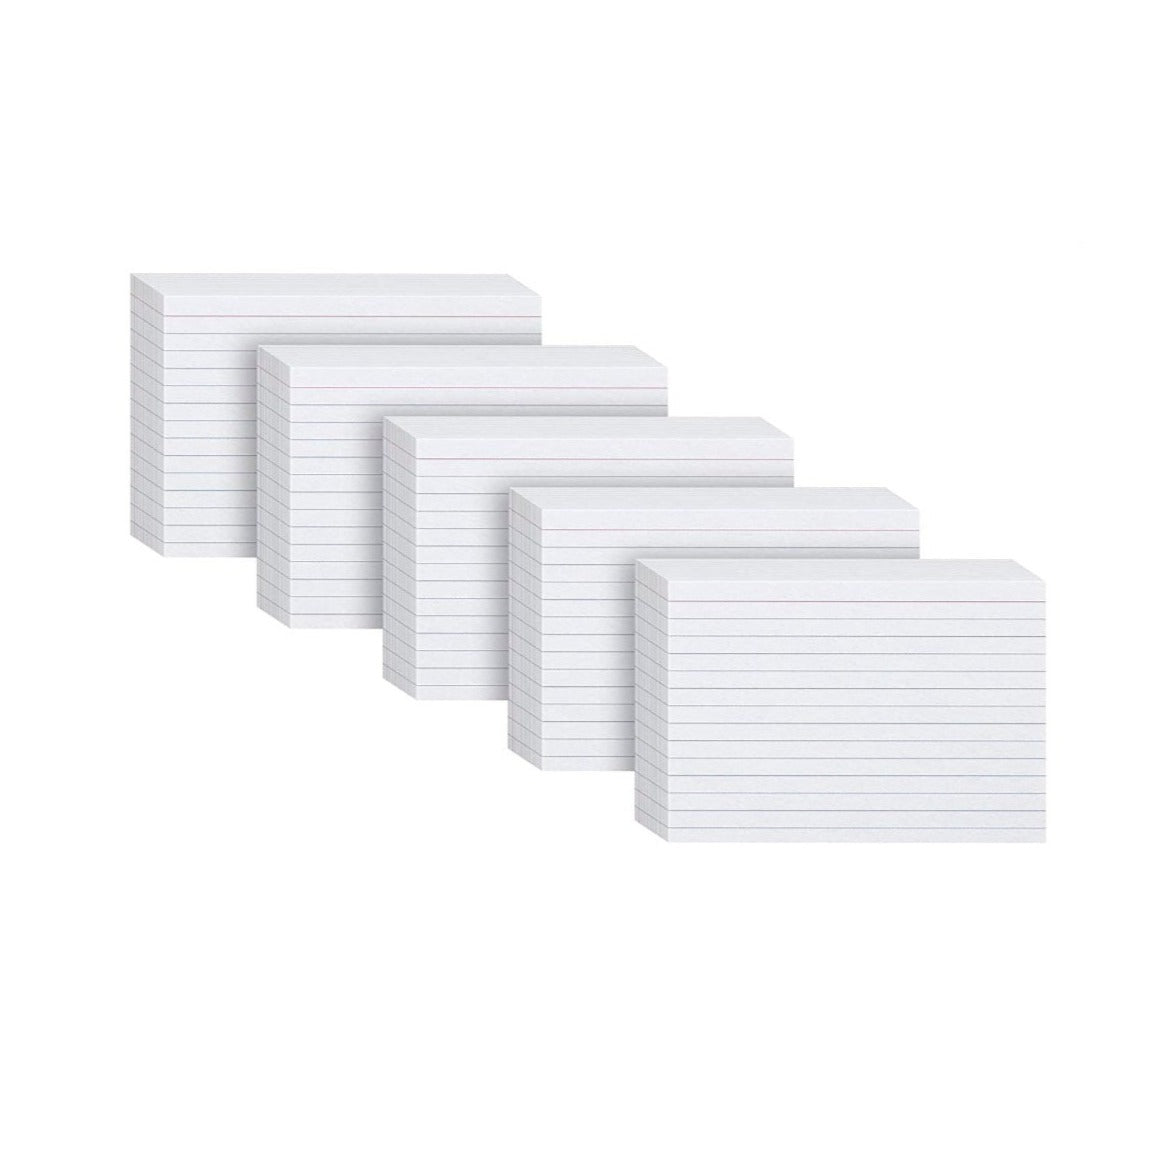 Oxford Ruled Index Cards, 4 x 6, White, 100-Pack 